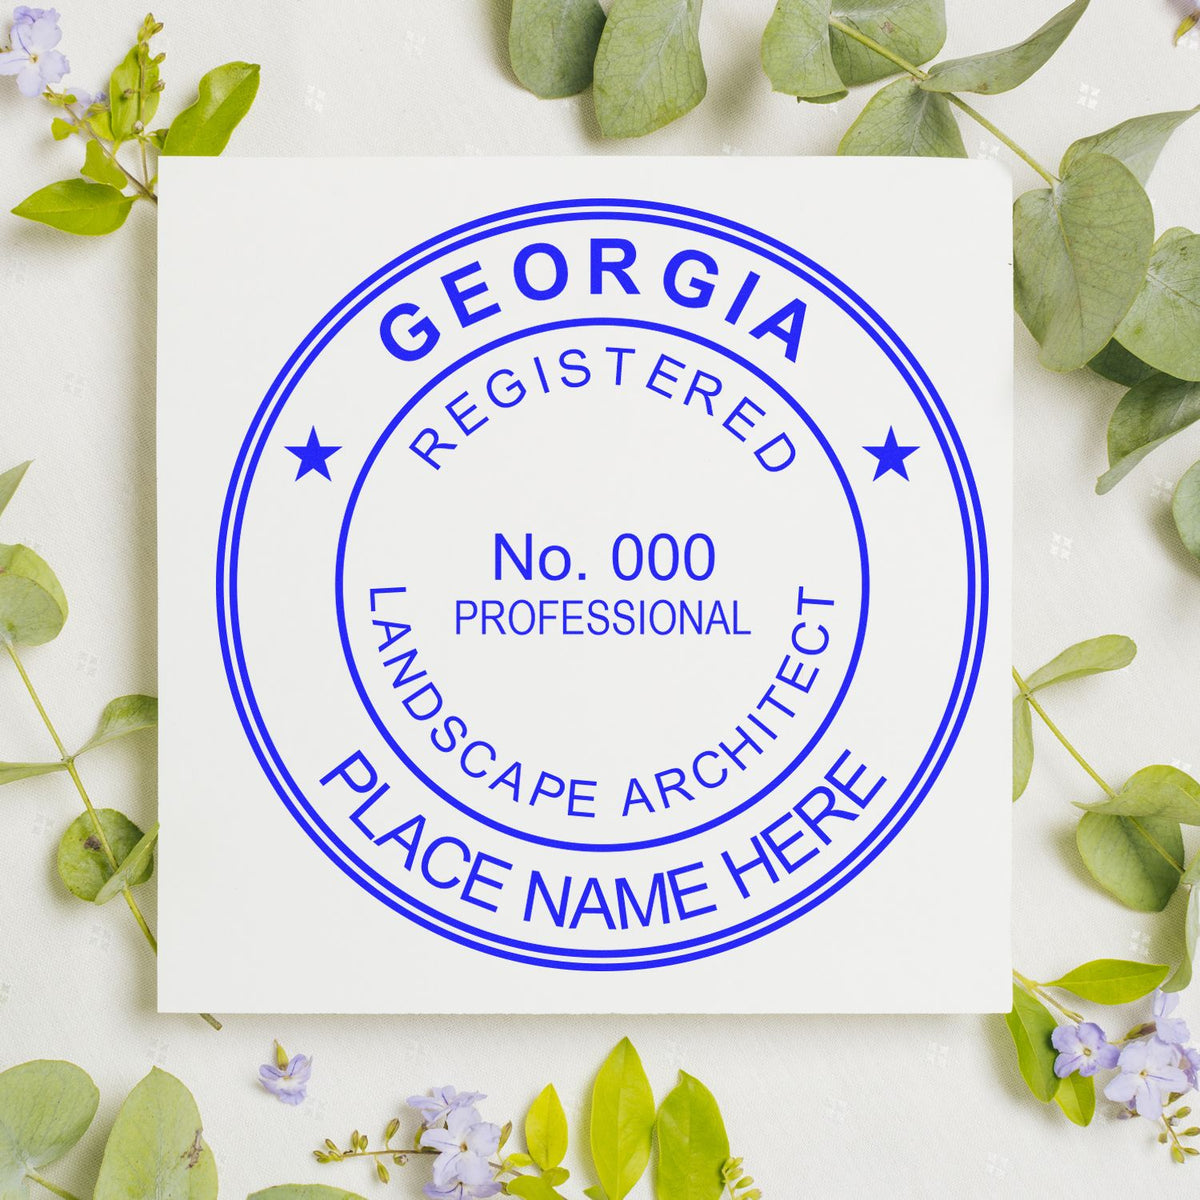 This paper is stamped with a sample imprint of the Self-Inking Georgia Landscape Architect Stamp, signifying its quality and reliability.